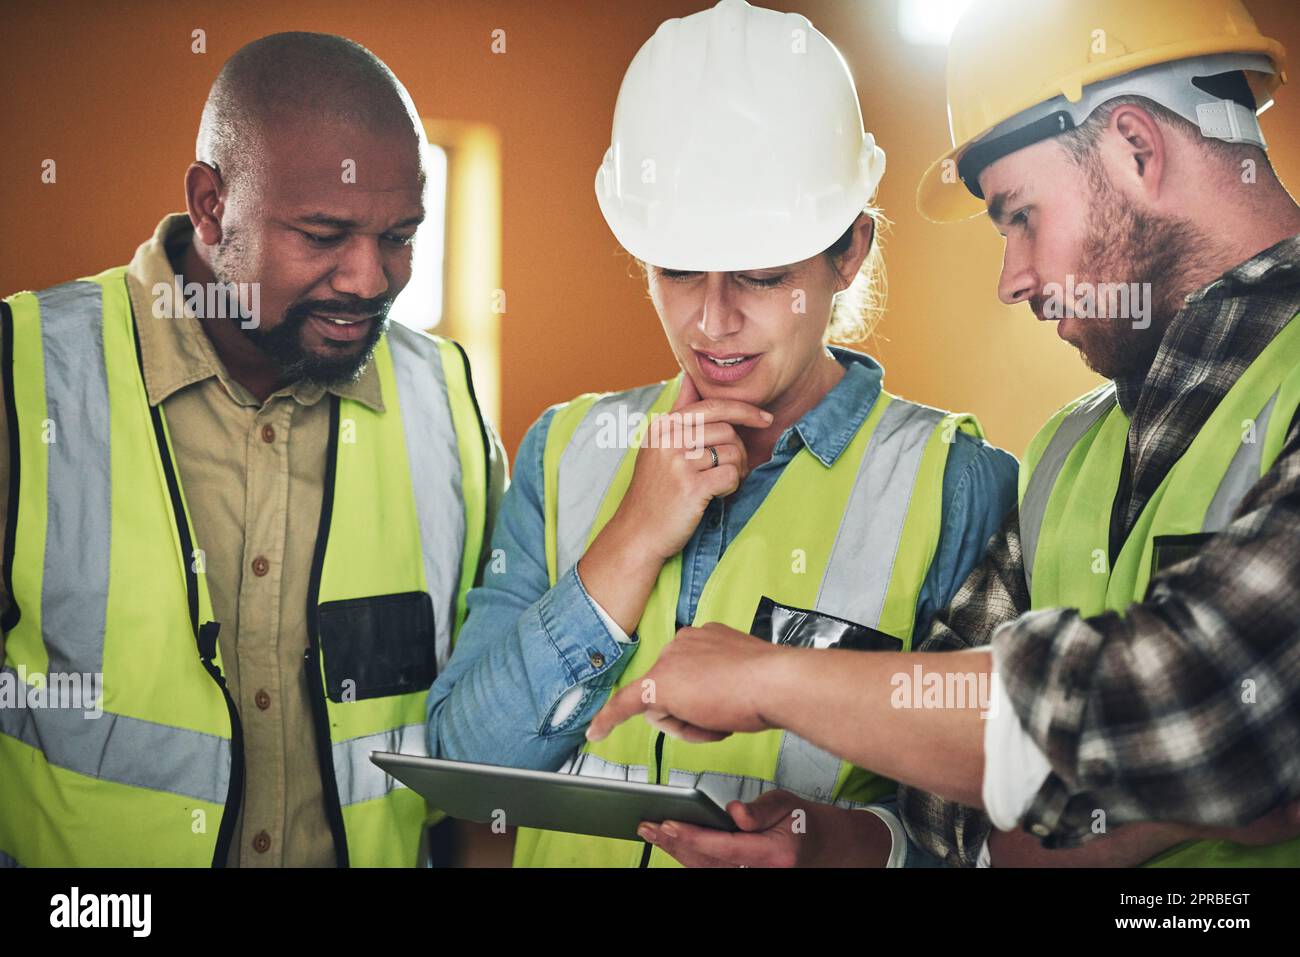 Cutting edge tech for quality construction. a group of builders using a digital tablet while working at a construction site. Stock Photo